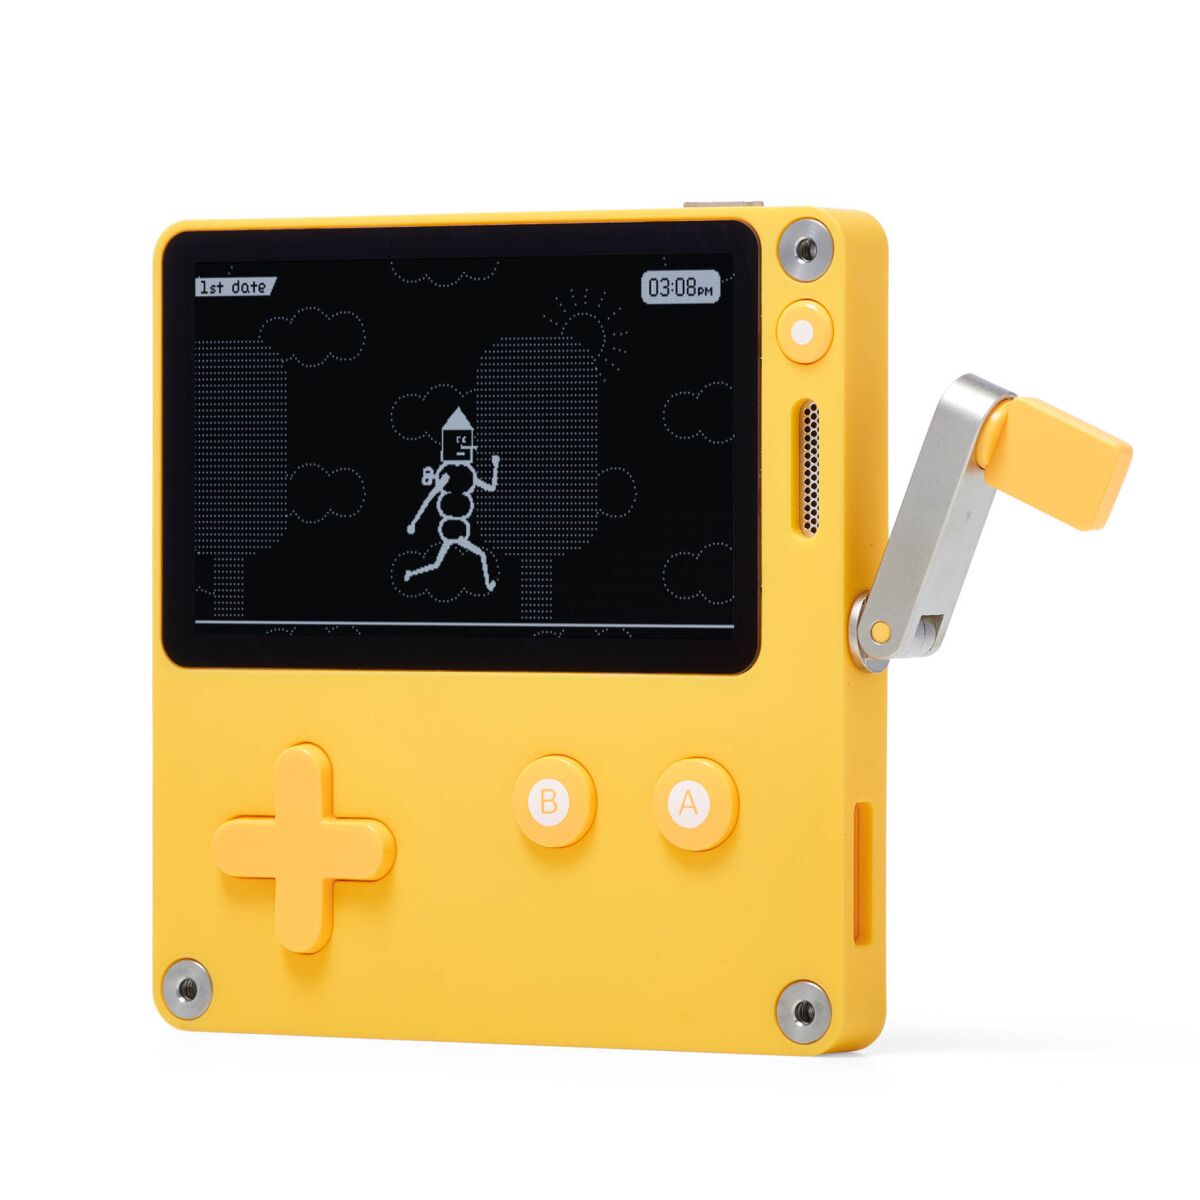 A small yellow plastic box with a hand crank on the side and a black-and-white figure on its screen.